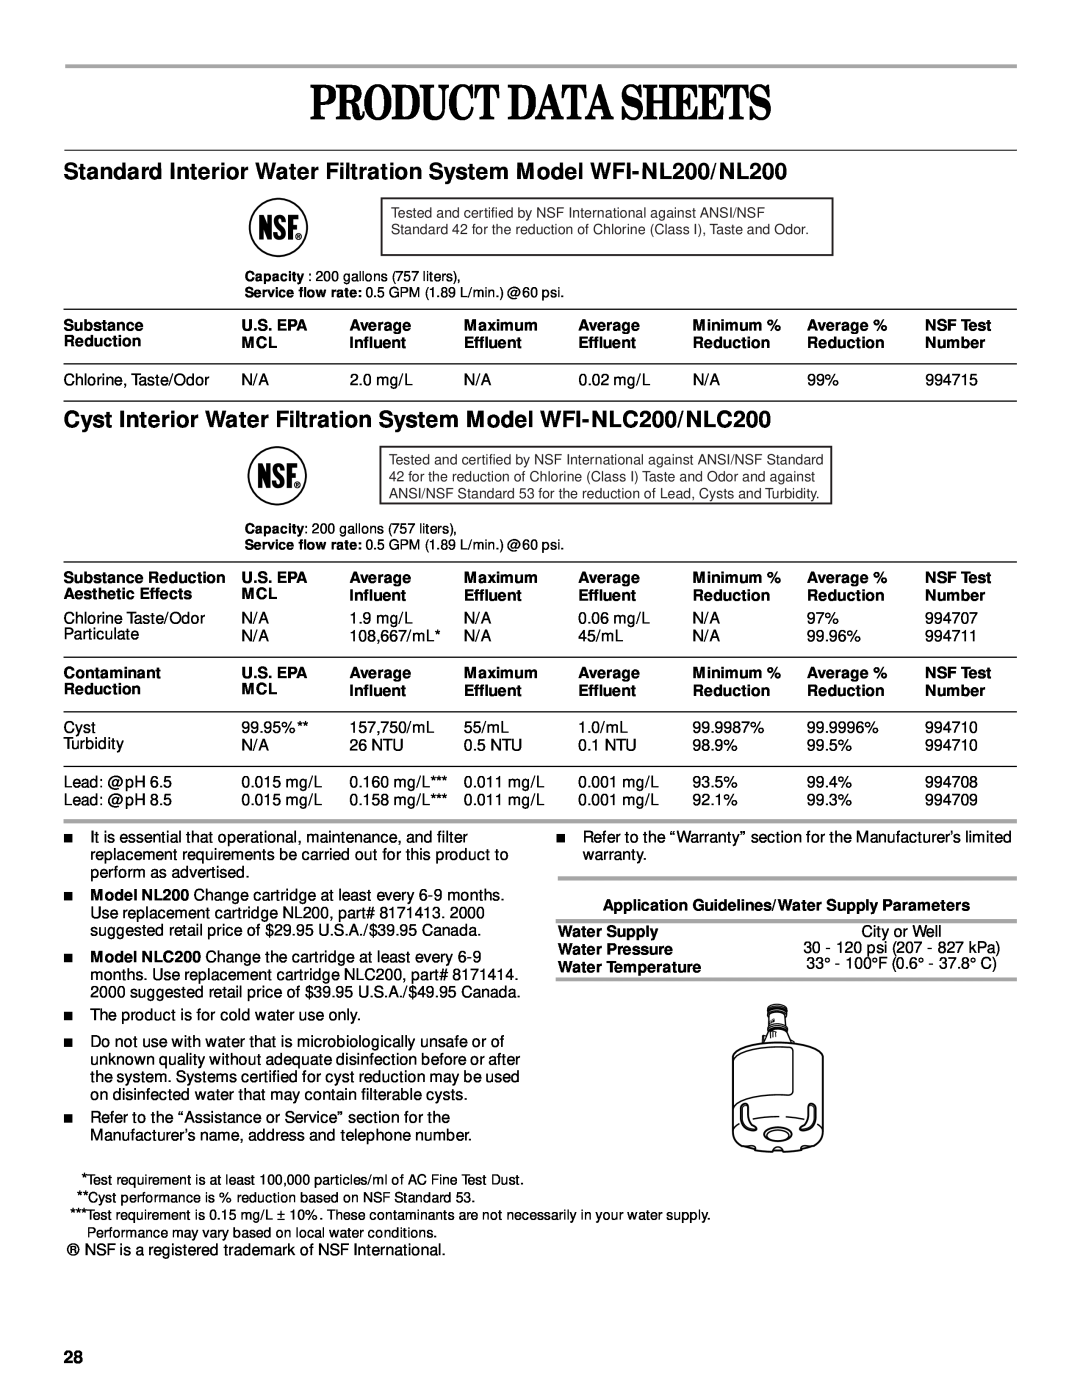 Whirlpool ED25LFXHB02 Product Data Sheets, Standard Interior Water Filtration System Model WFI-NL200/NL200, Substance 